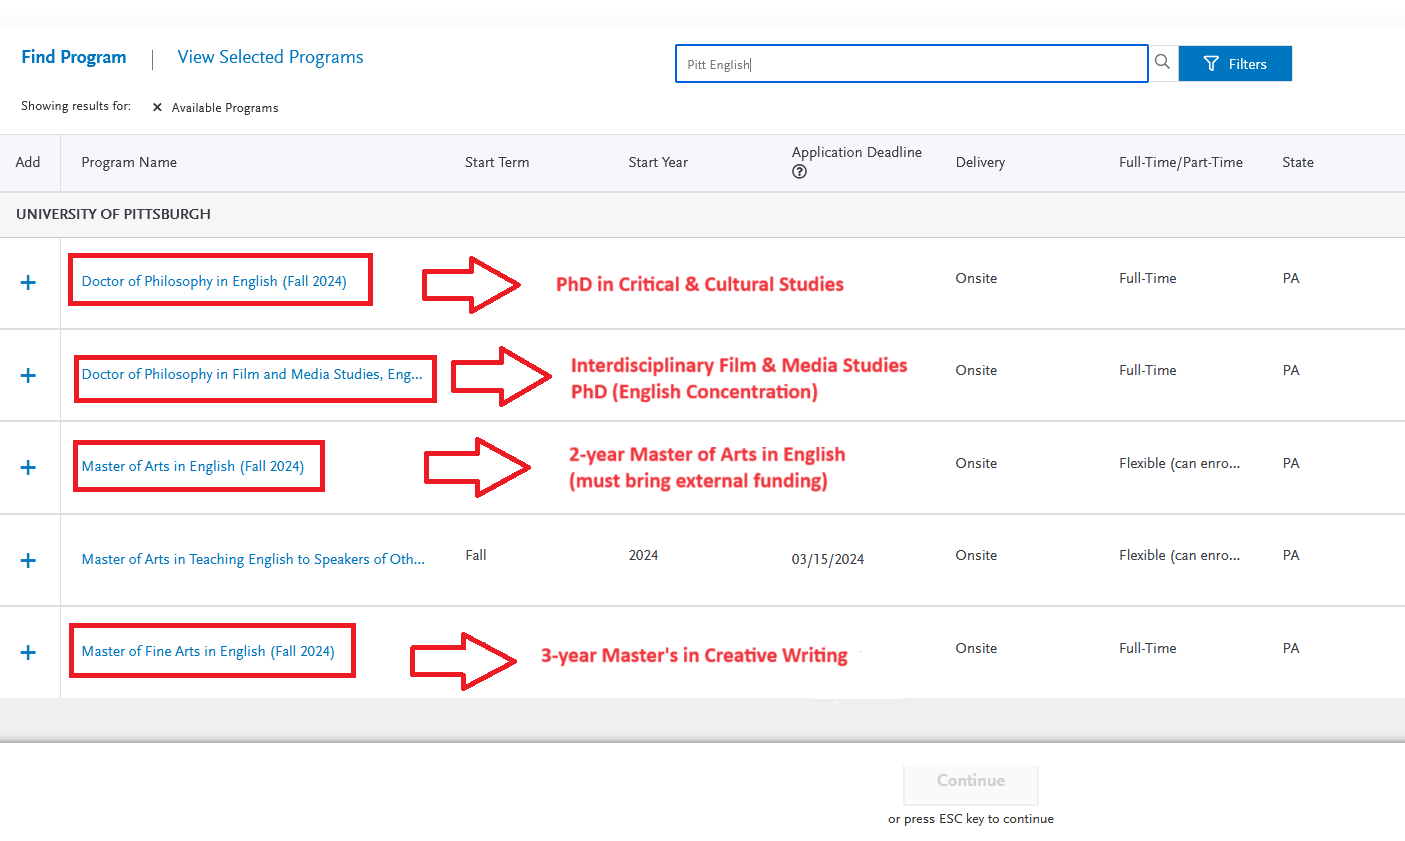 An image of the search screen in the "Add program" tab of GradCAS. A search bar at the top right corner shows a search with the keywords "Pitt English". A list of University of Pittsburgh graduate programs with "English" in the program name appear in the results underneath, including "Doctor of Philosophy in English," "Doctor of Philosophy in Film and Media Studies, English," "Master of Arts in English," and "Master of Fine Arts in English." A red arrow stands next to each program name, indicating which program name to select to apply to a particular program. Those applying to the PhD in Critical & Cultural Studies should select "Doctor of Philosophy in English." Those applying for the Interdisciplinary Film & Media Studies PhD with an English concentration should select "Doctor of Philosophy in Film and Media Studies, English." Those applying for the 2-year Master of Arts program should select, "Master of Arts in English." Those applying for the Master of Fine Arts in Creative Writing should select, "Master of Fine Arts in English."